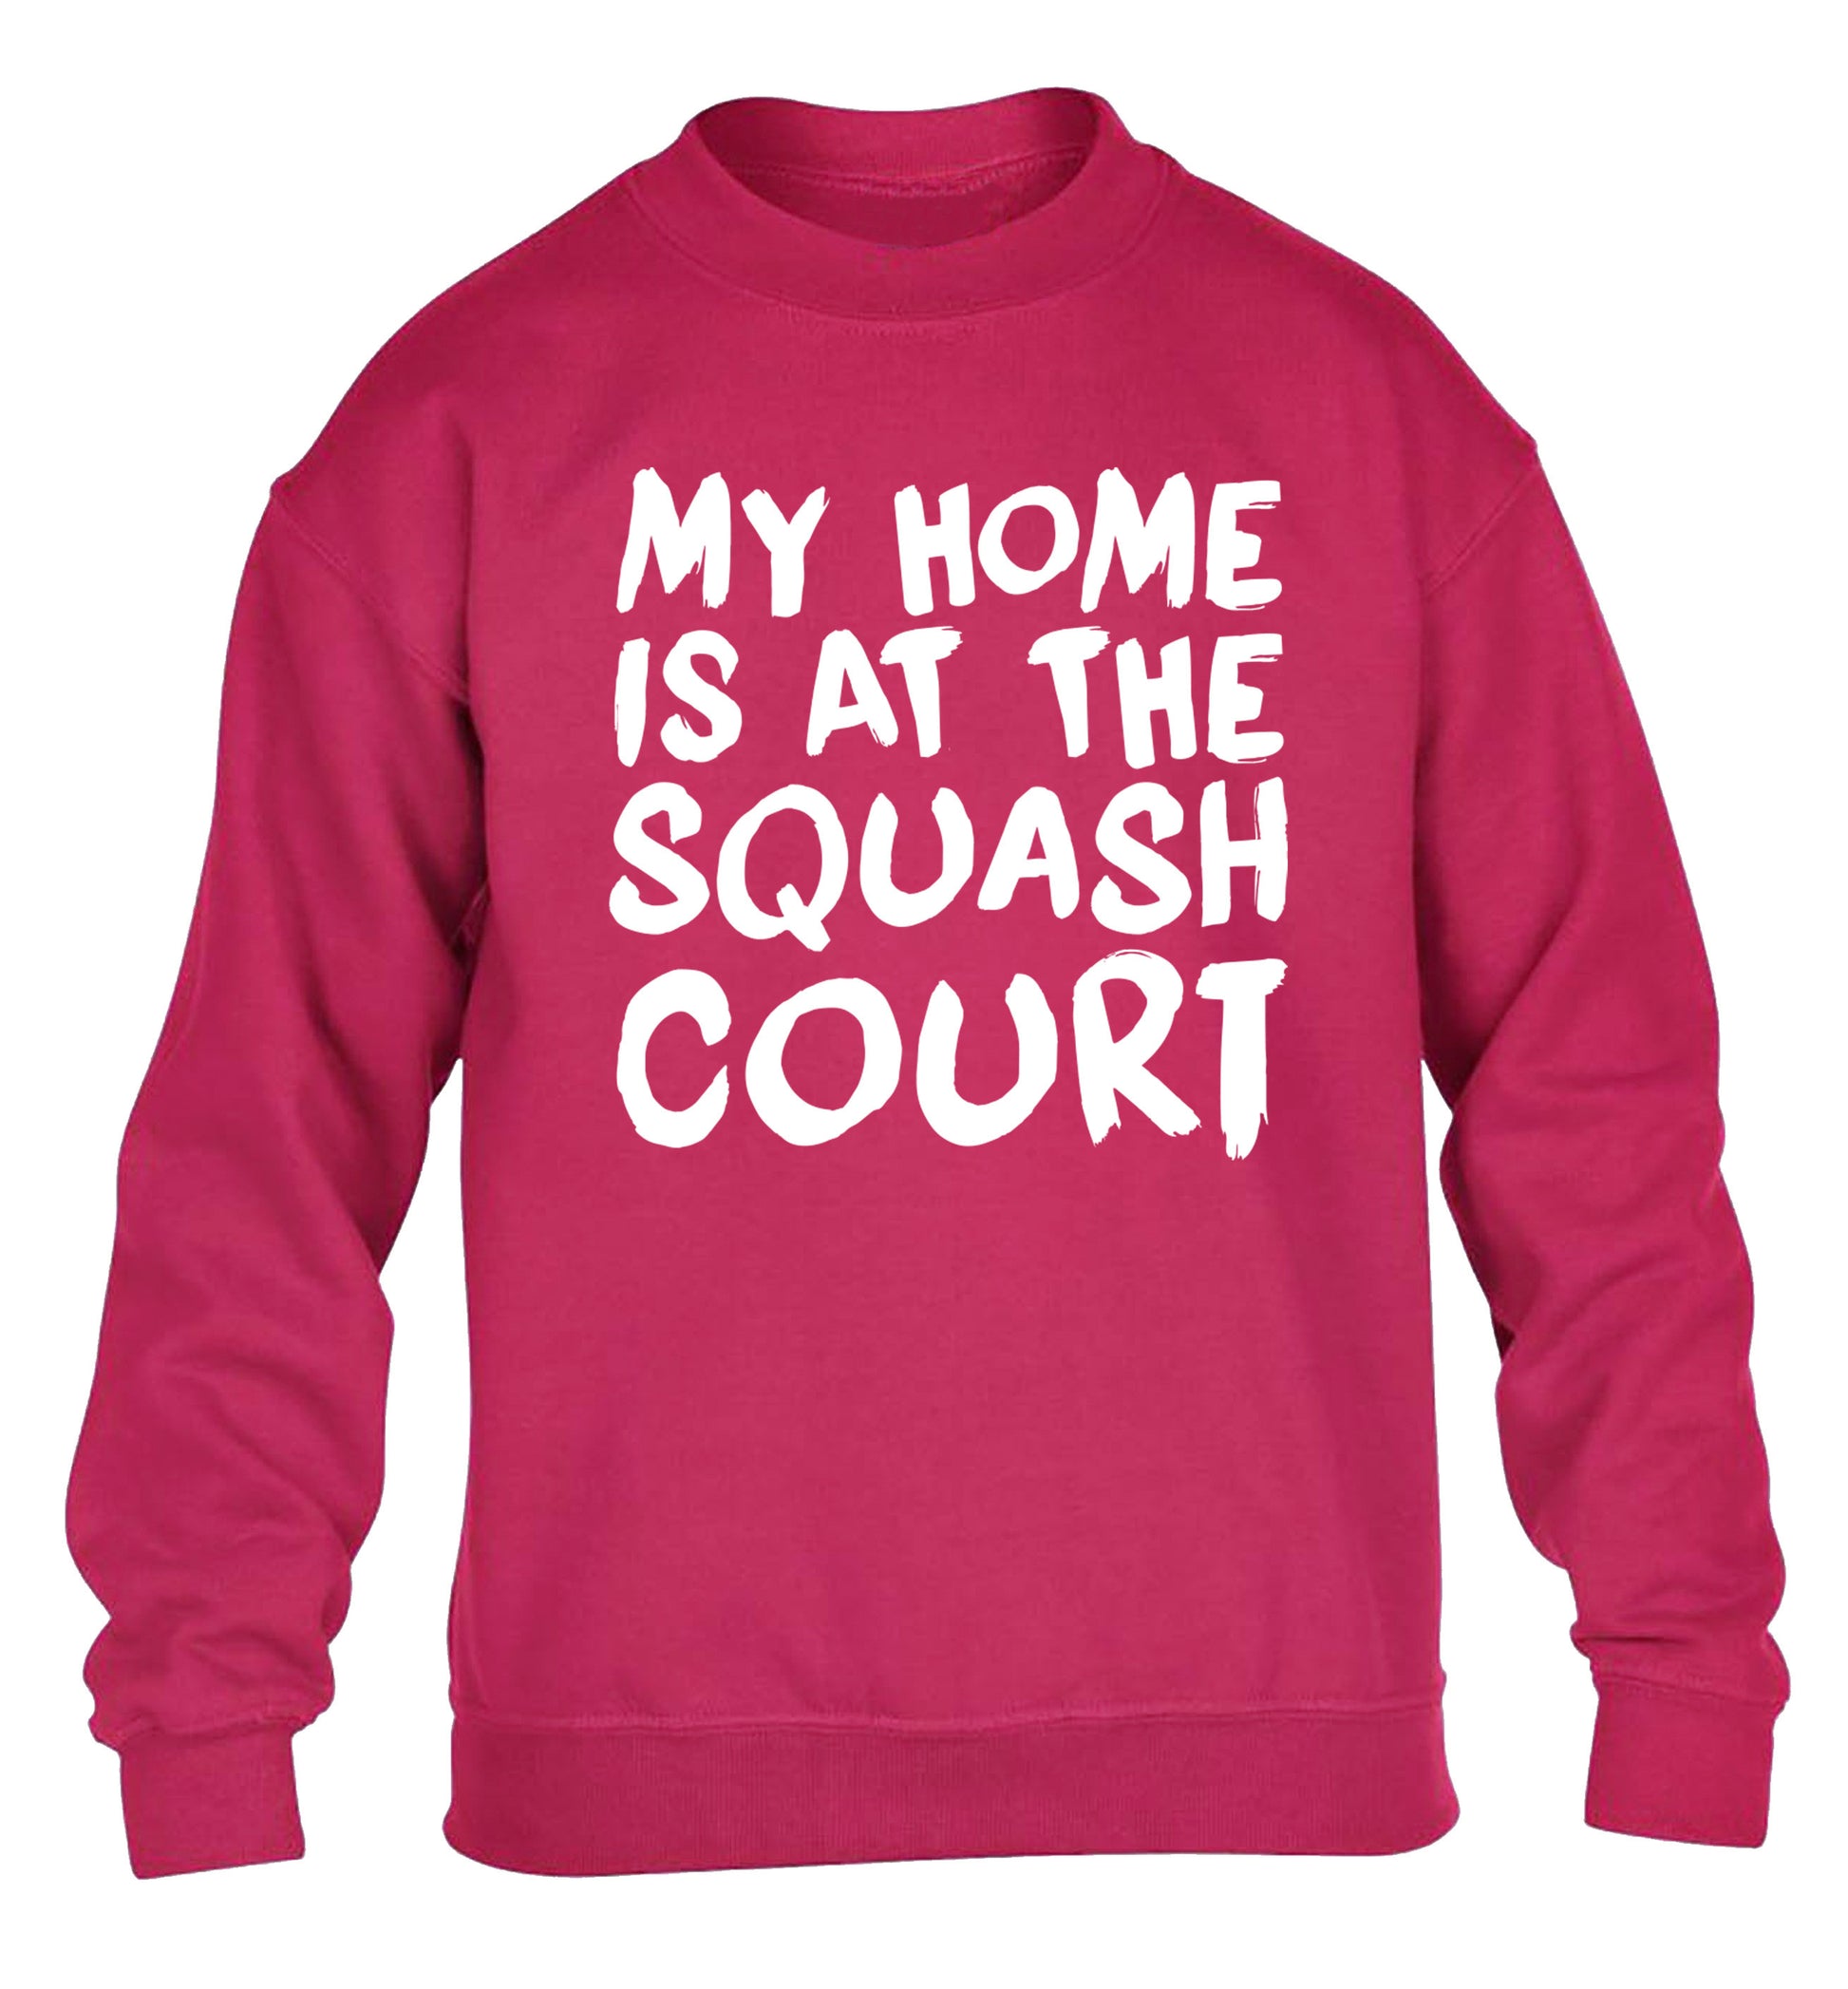 My home is at the squash court children's pink sweater 12-14 Years